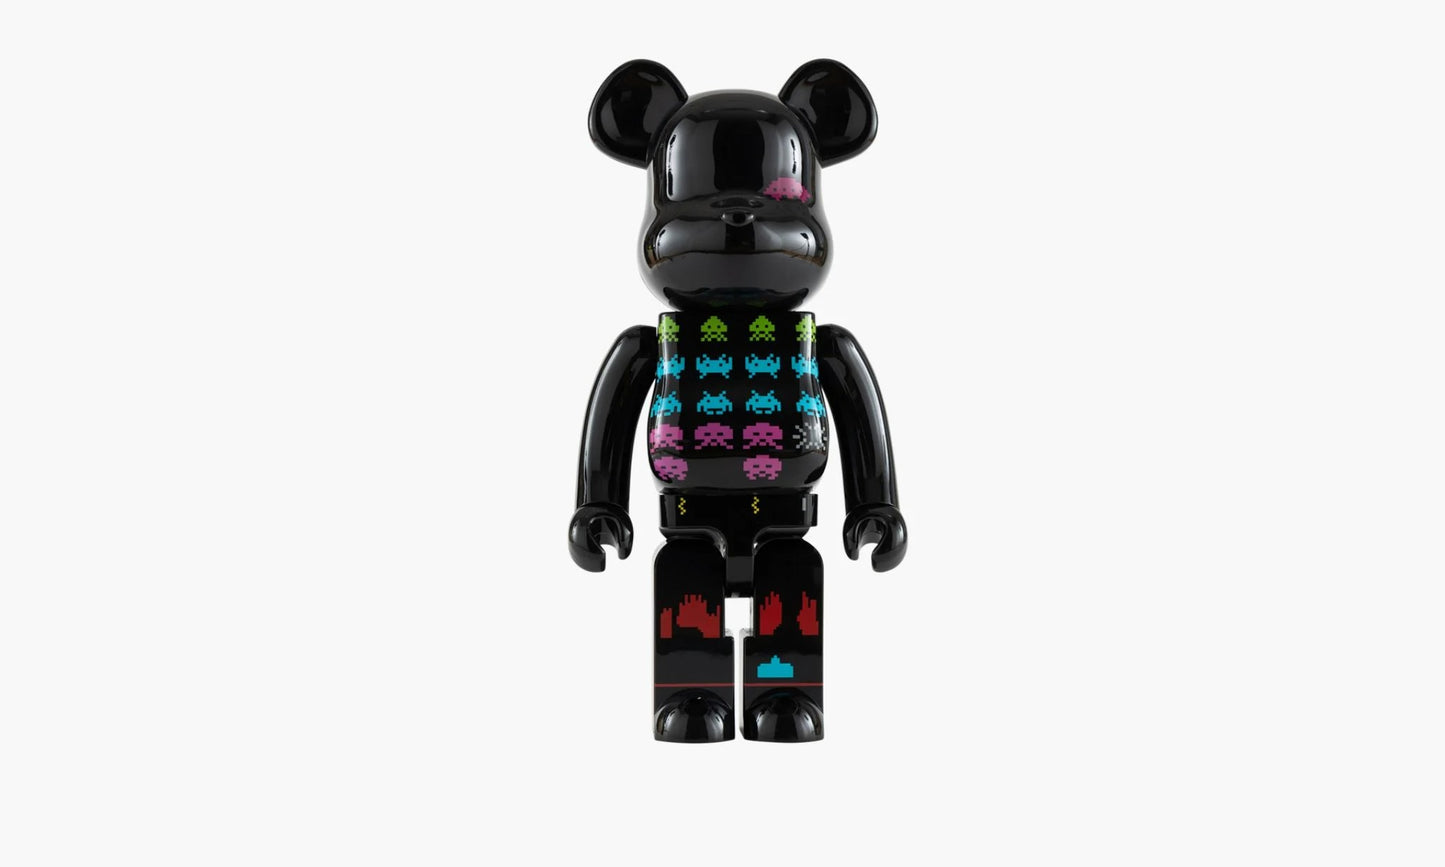 Bearbrick Space Invaders 1000% | The Sortage